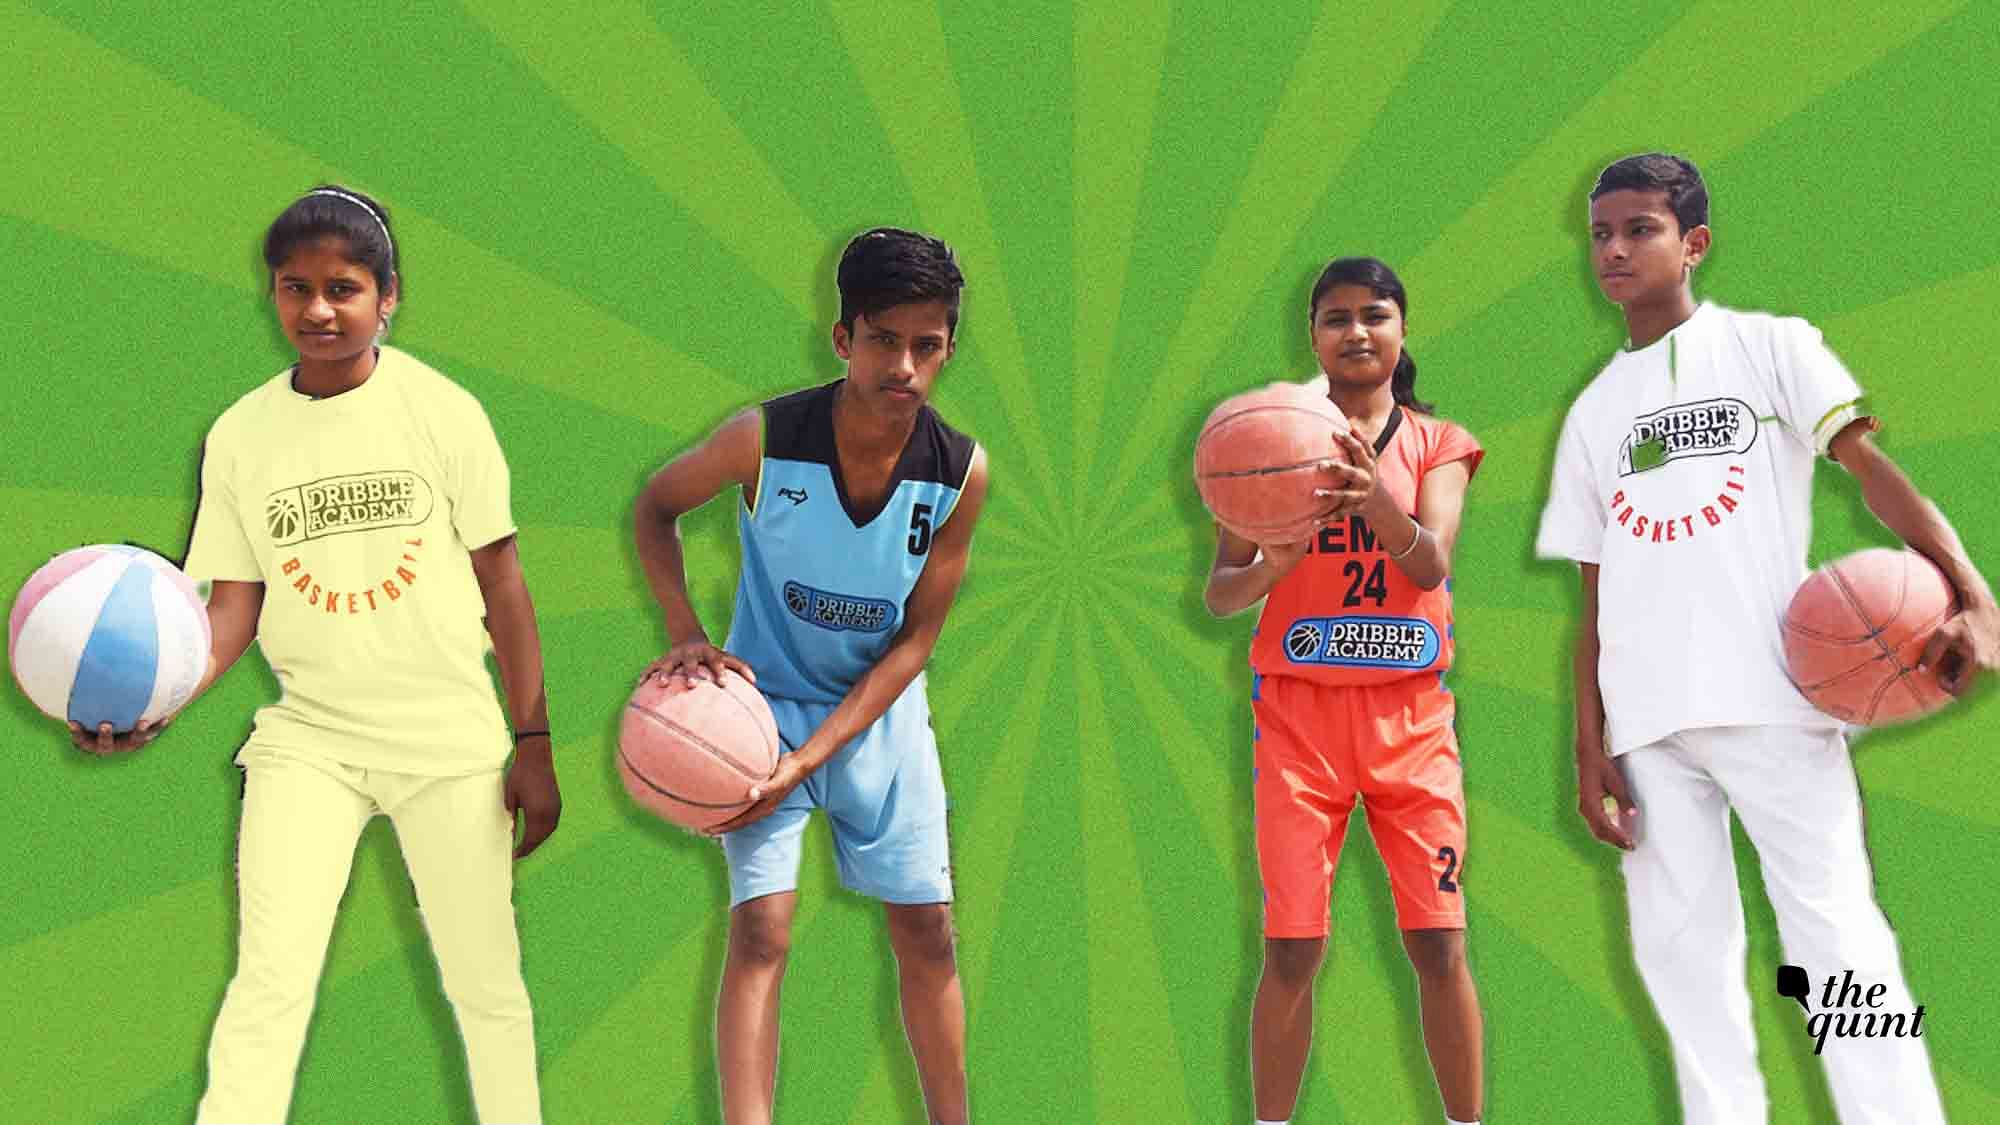 Five children have been selected for the Junior NBA Nationals from Gejha village in Noida.